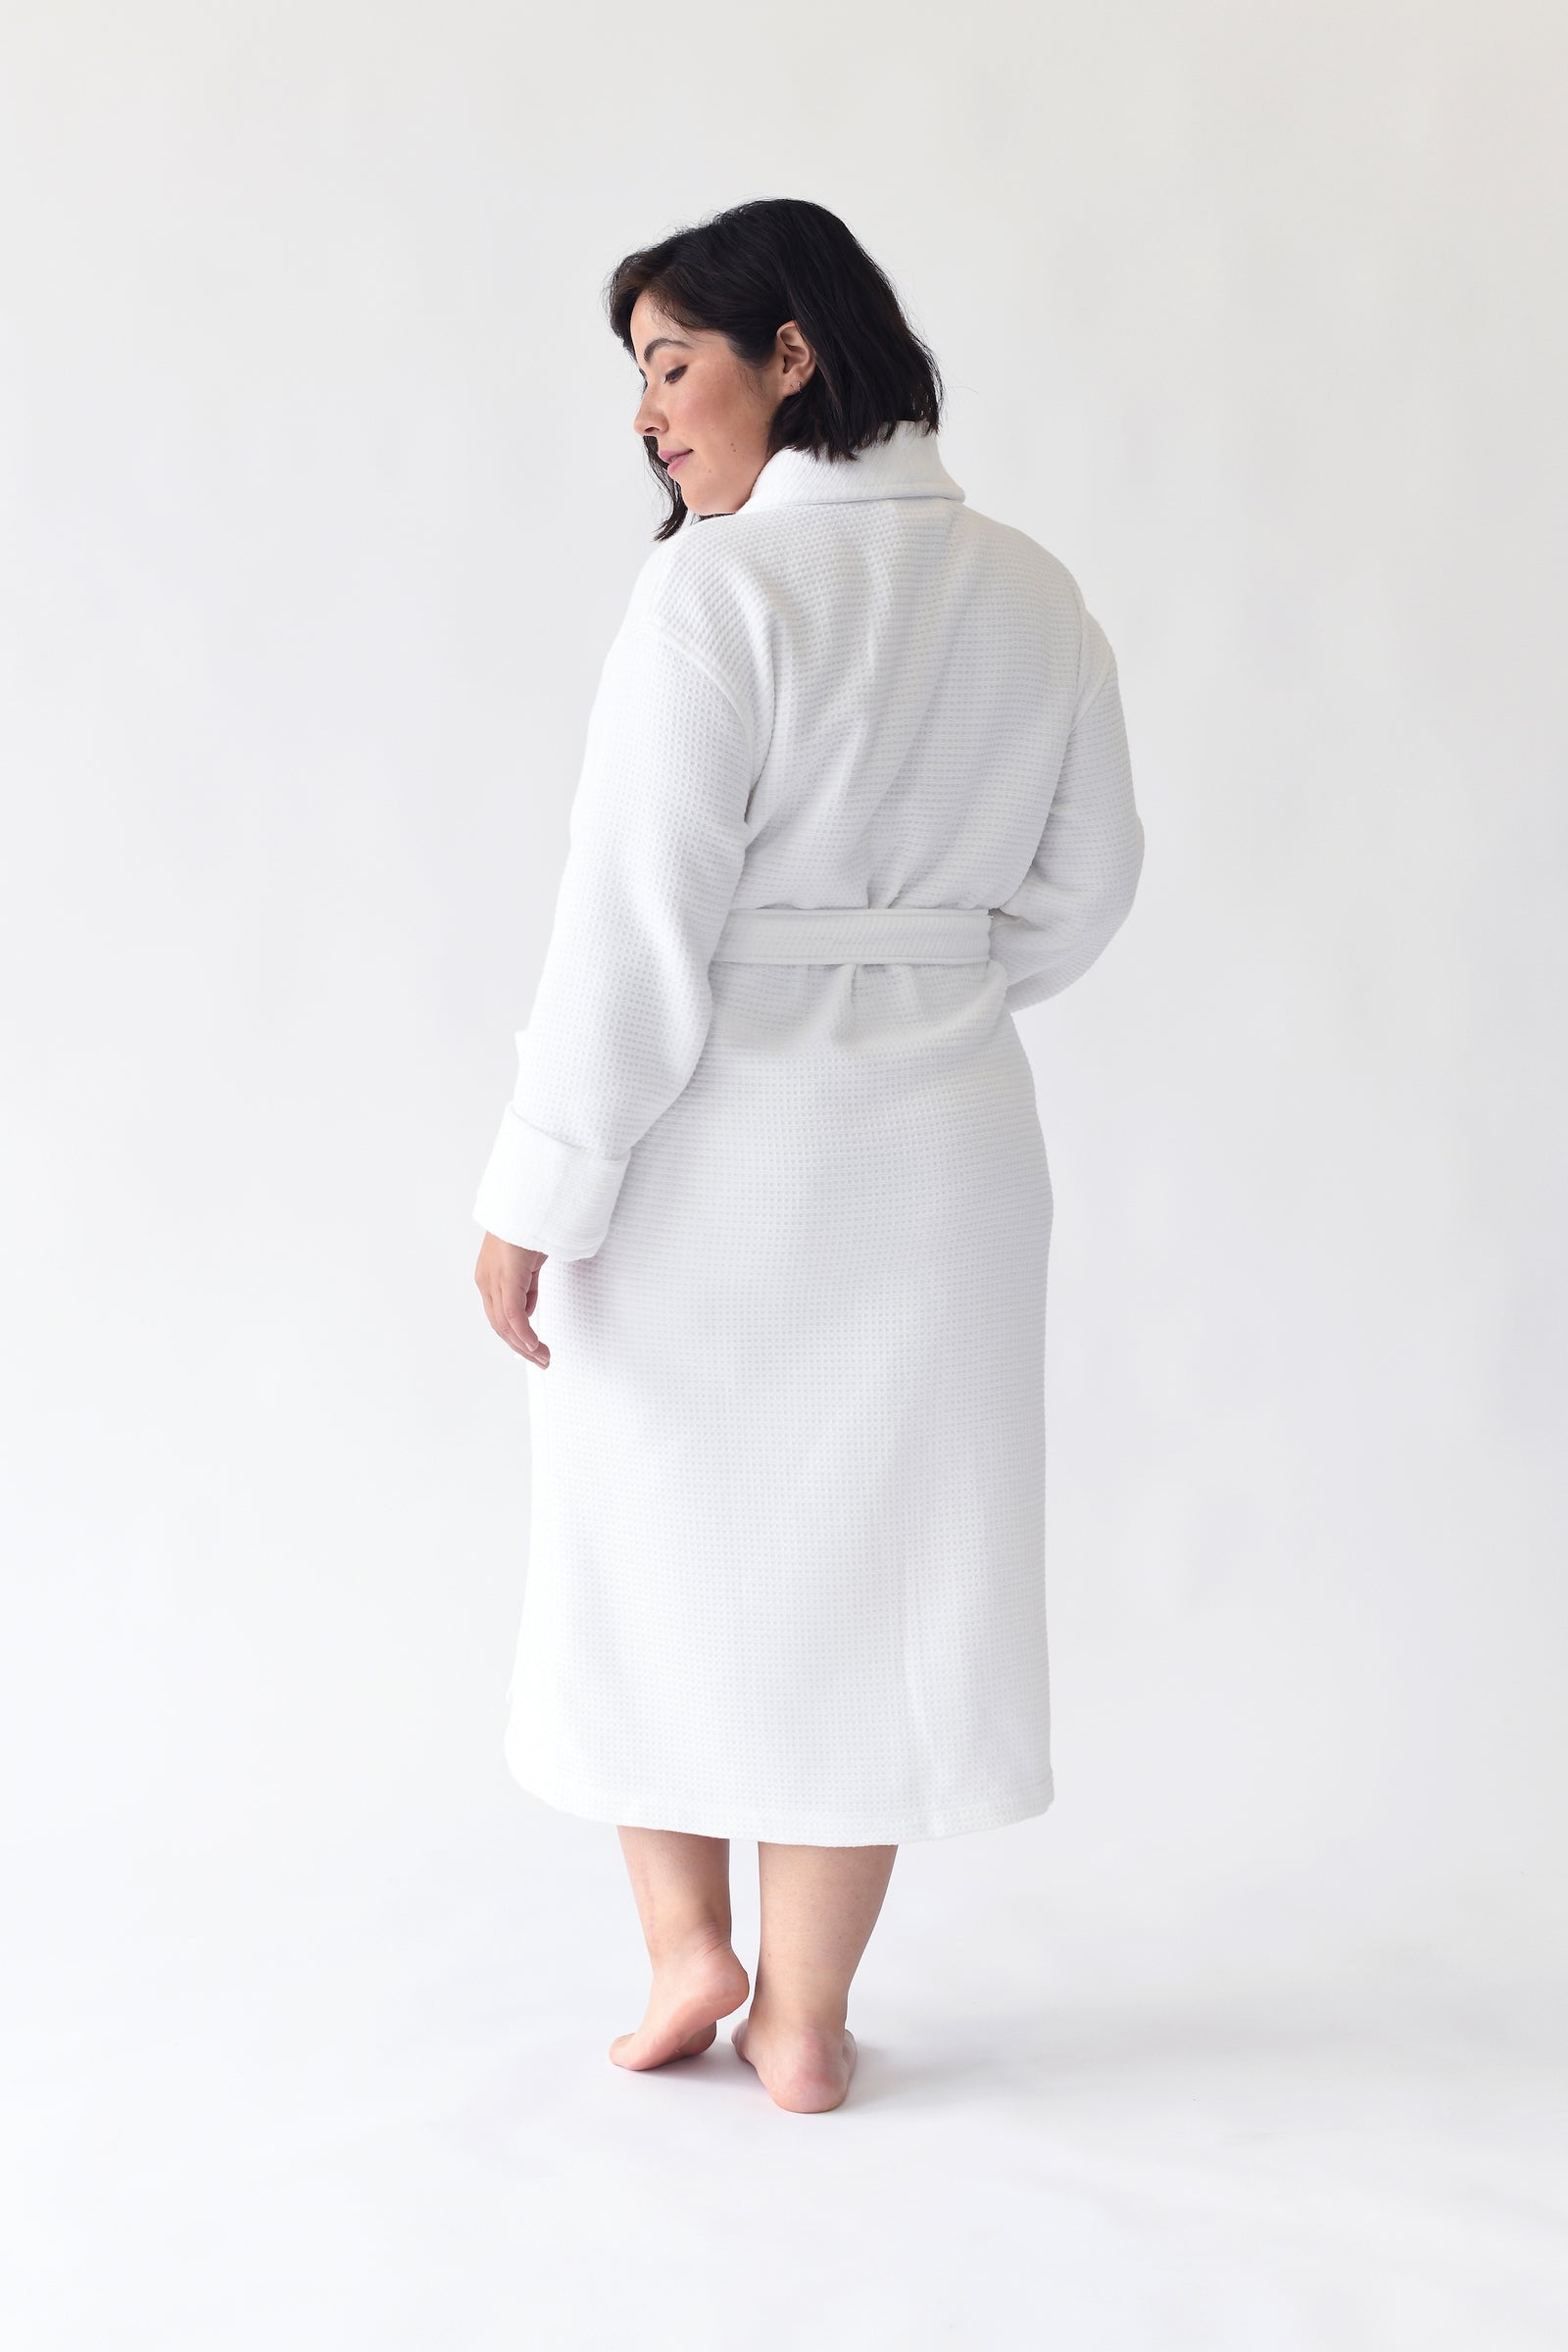 Woman wearing Bamboo Waffle Bath robe standing in front of a with a white background. 